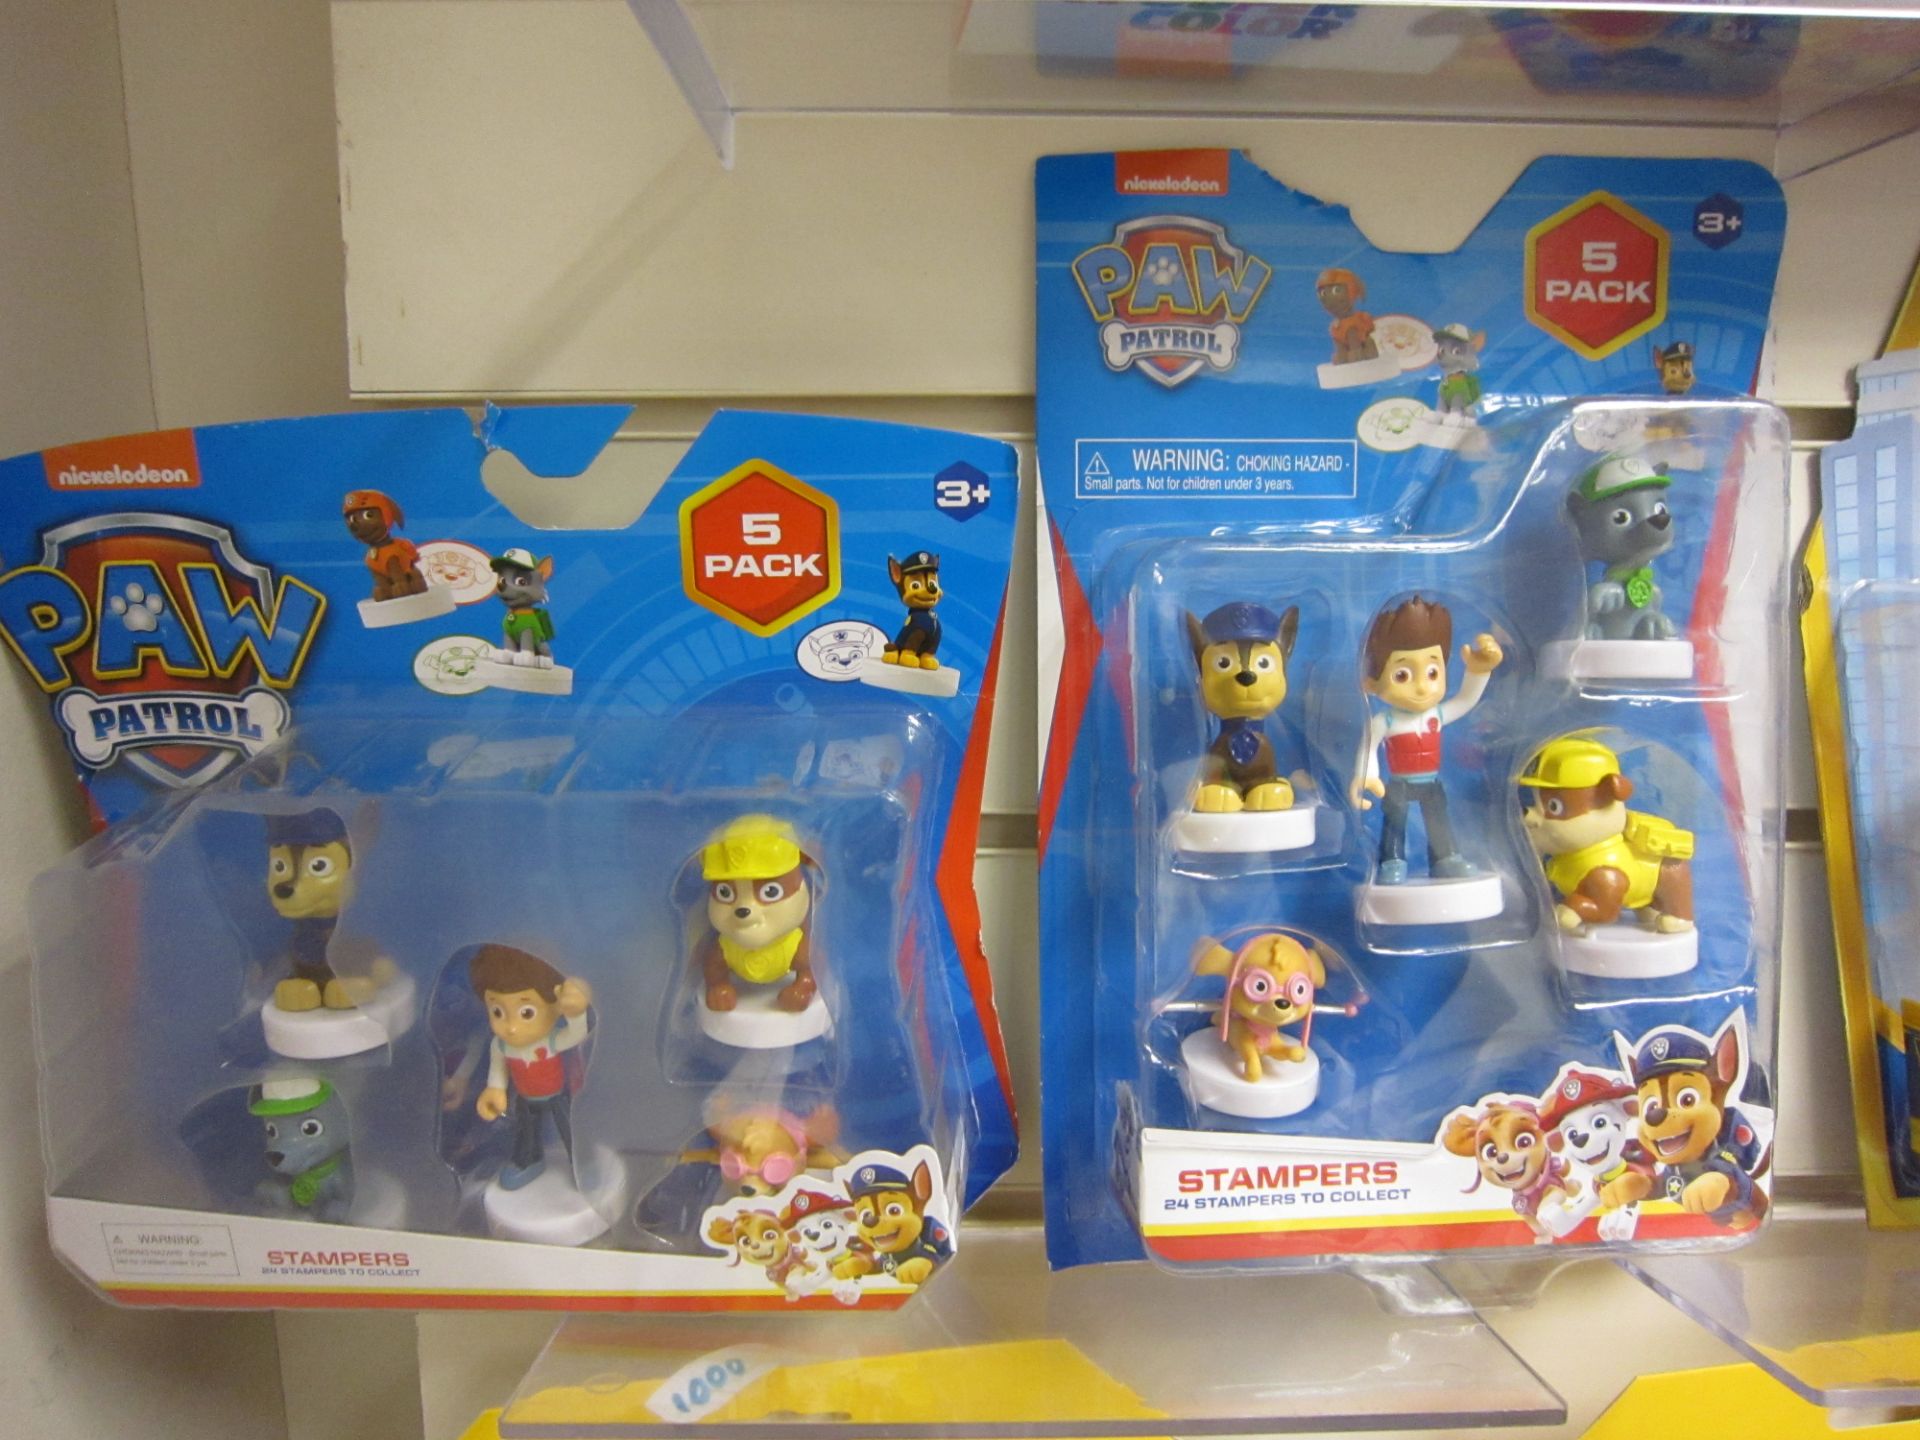 101 Assorted Paw Patrol Stampers / Toppers Sets All Brand New Sealed, Assorted Varieties All Bra...